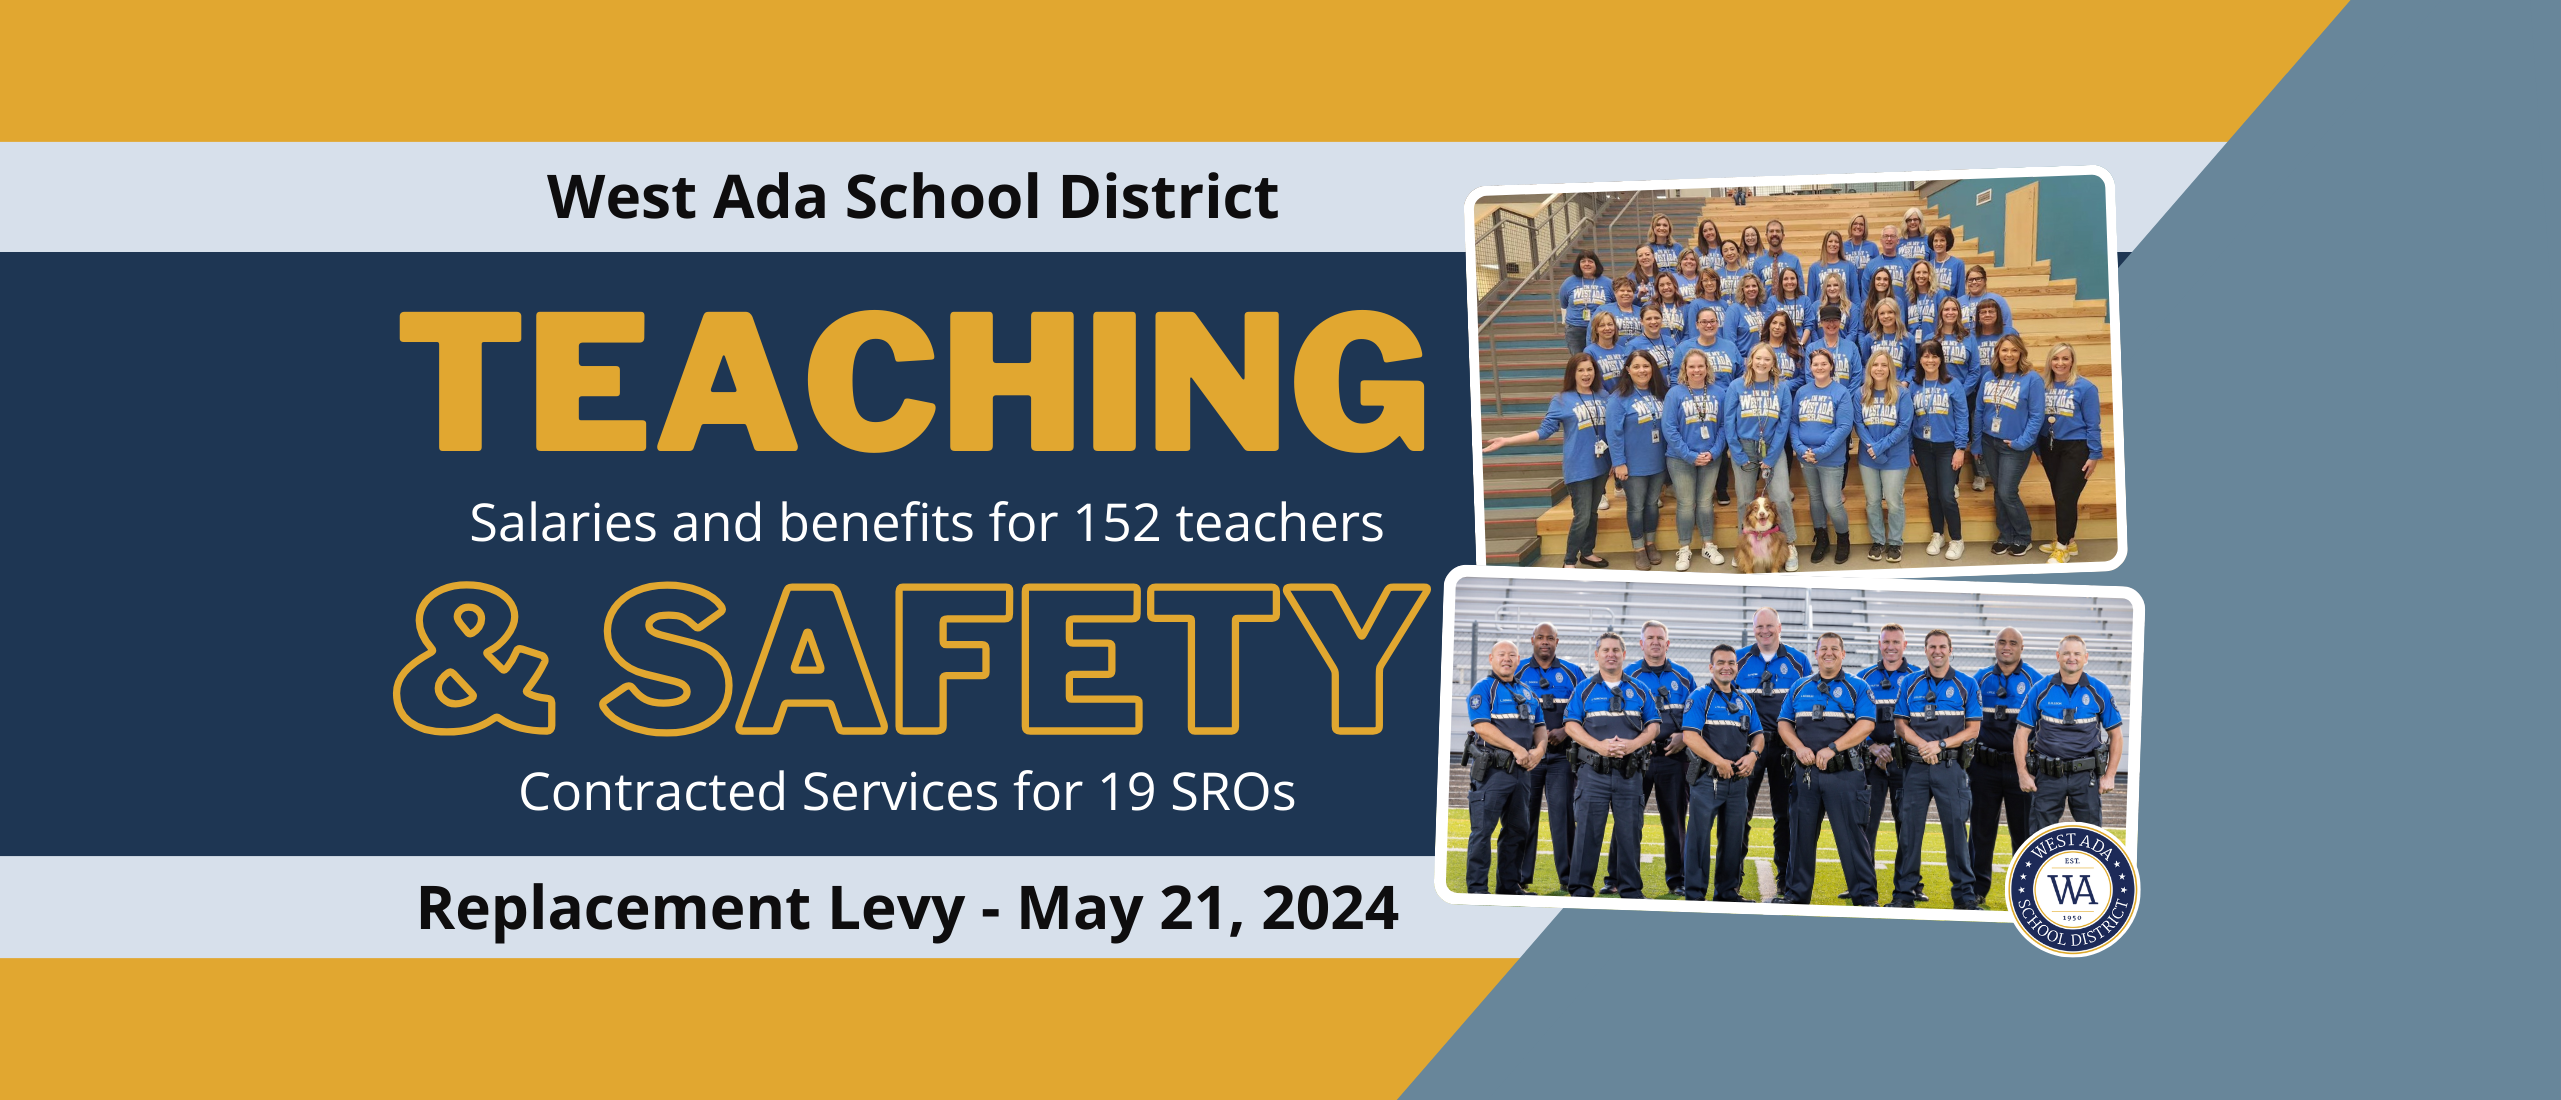 West Ada Replacement Levy - May 21, 2024 - Teaching & Safety - Salaries and benefits for 152 teachers - Contracted services for 19 SROs.